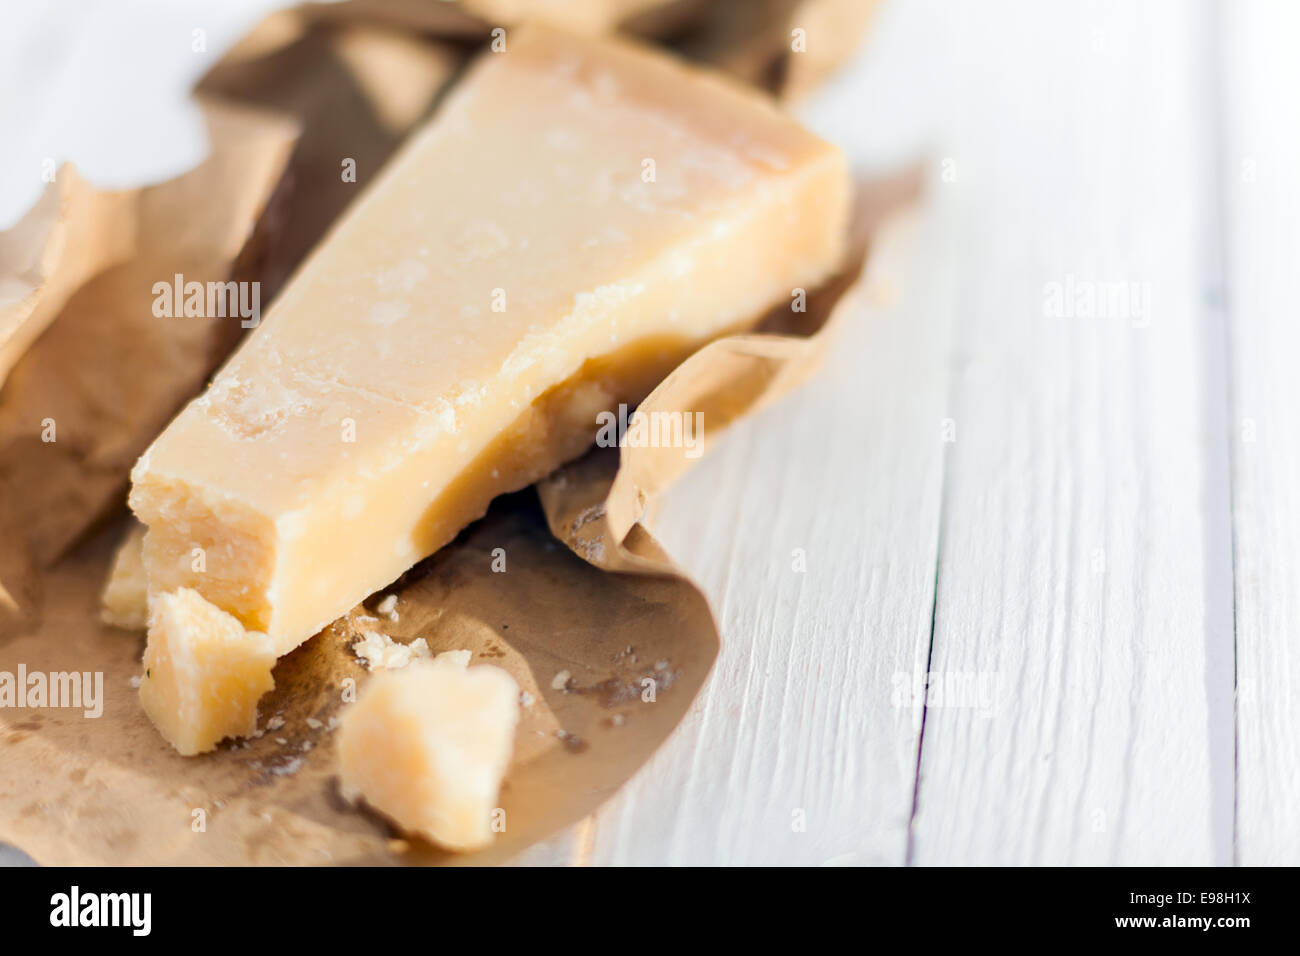 Wedge of hardy crumbly matured Italian Parmigiano-Reggiano cheese, or Parmesan, in a torn brown paper wrapper on a white wooden Stock Photo